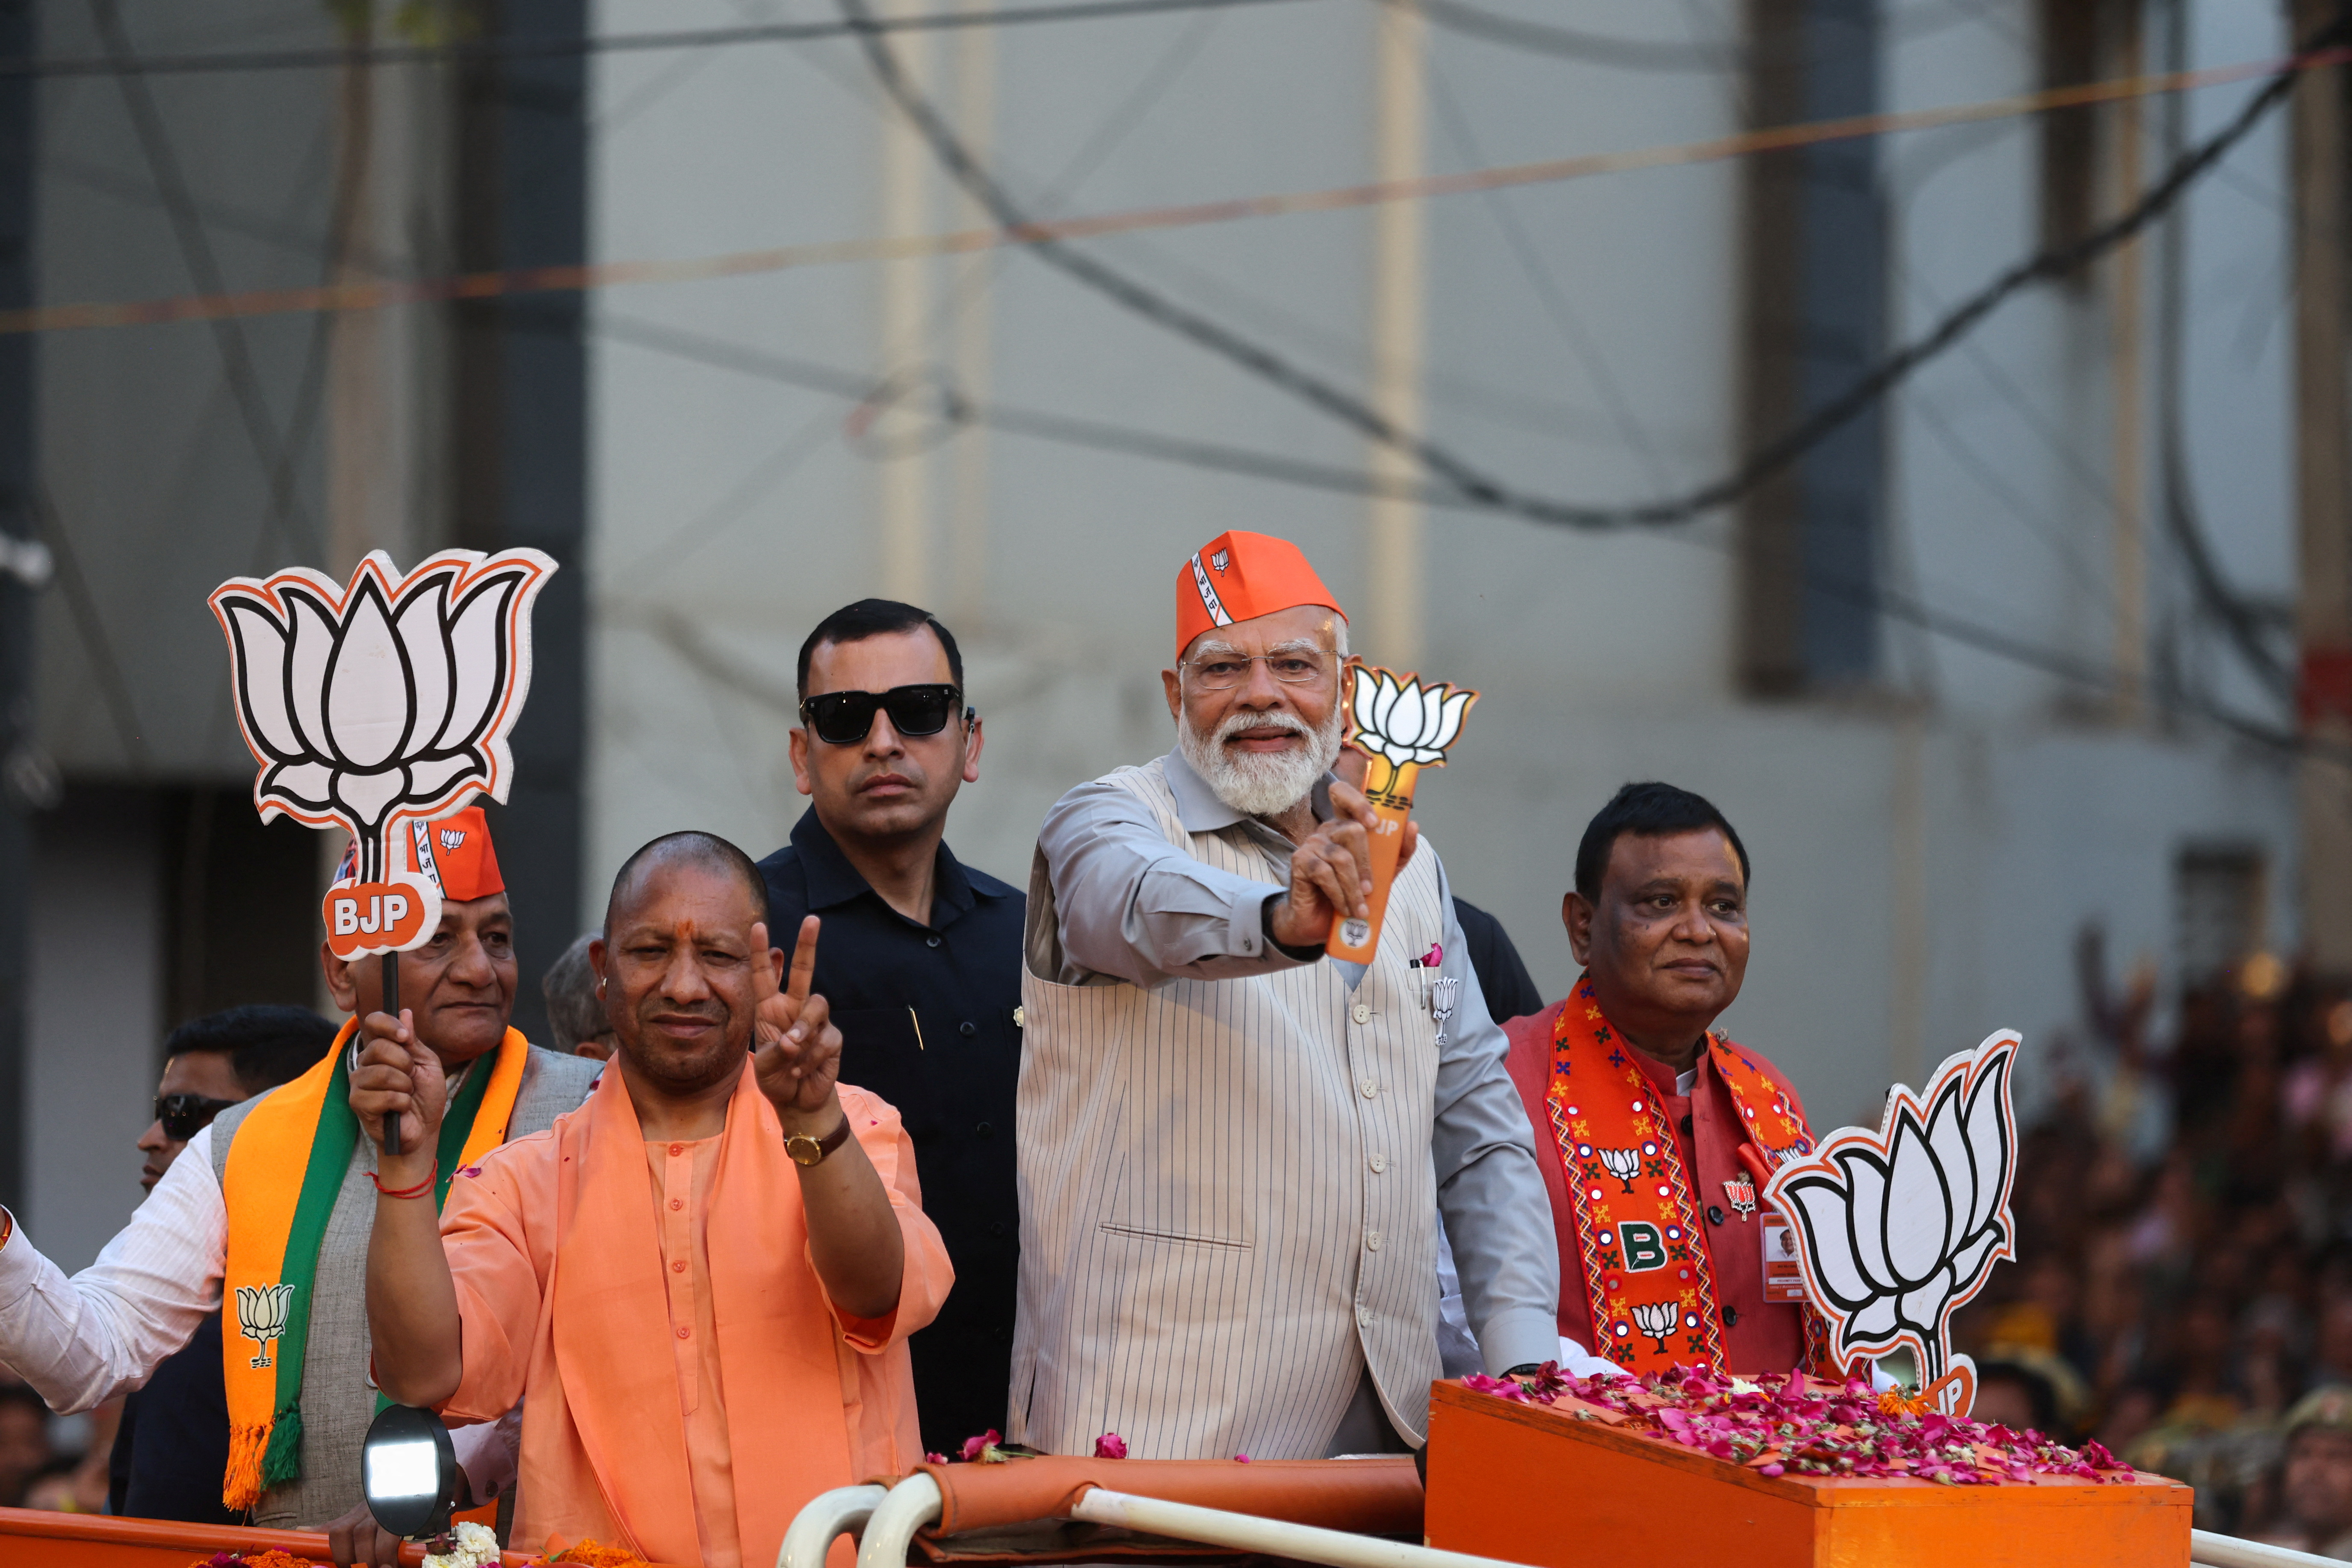 India's PM Modi takes part in a roadshow, in Ghaziabad